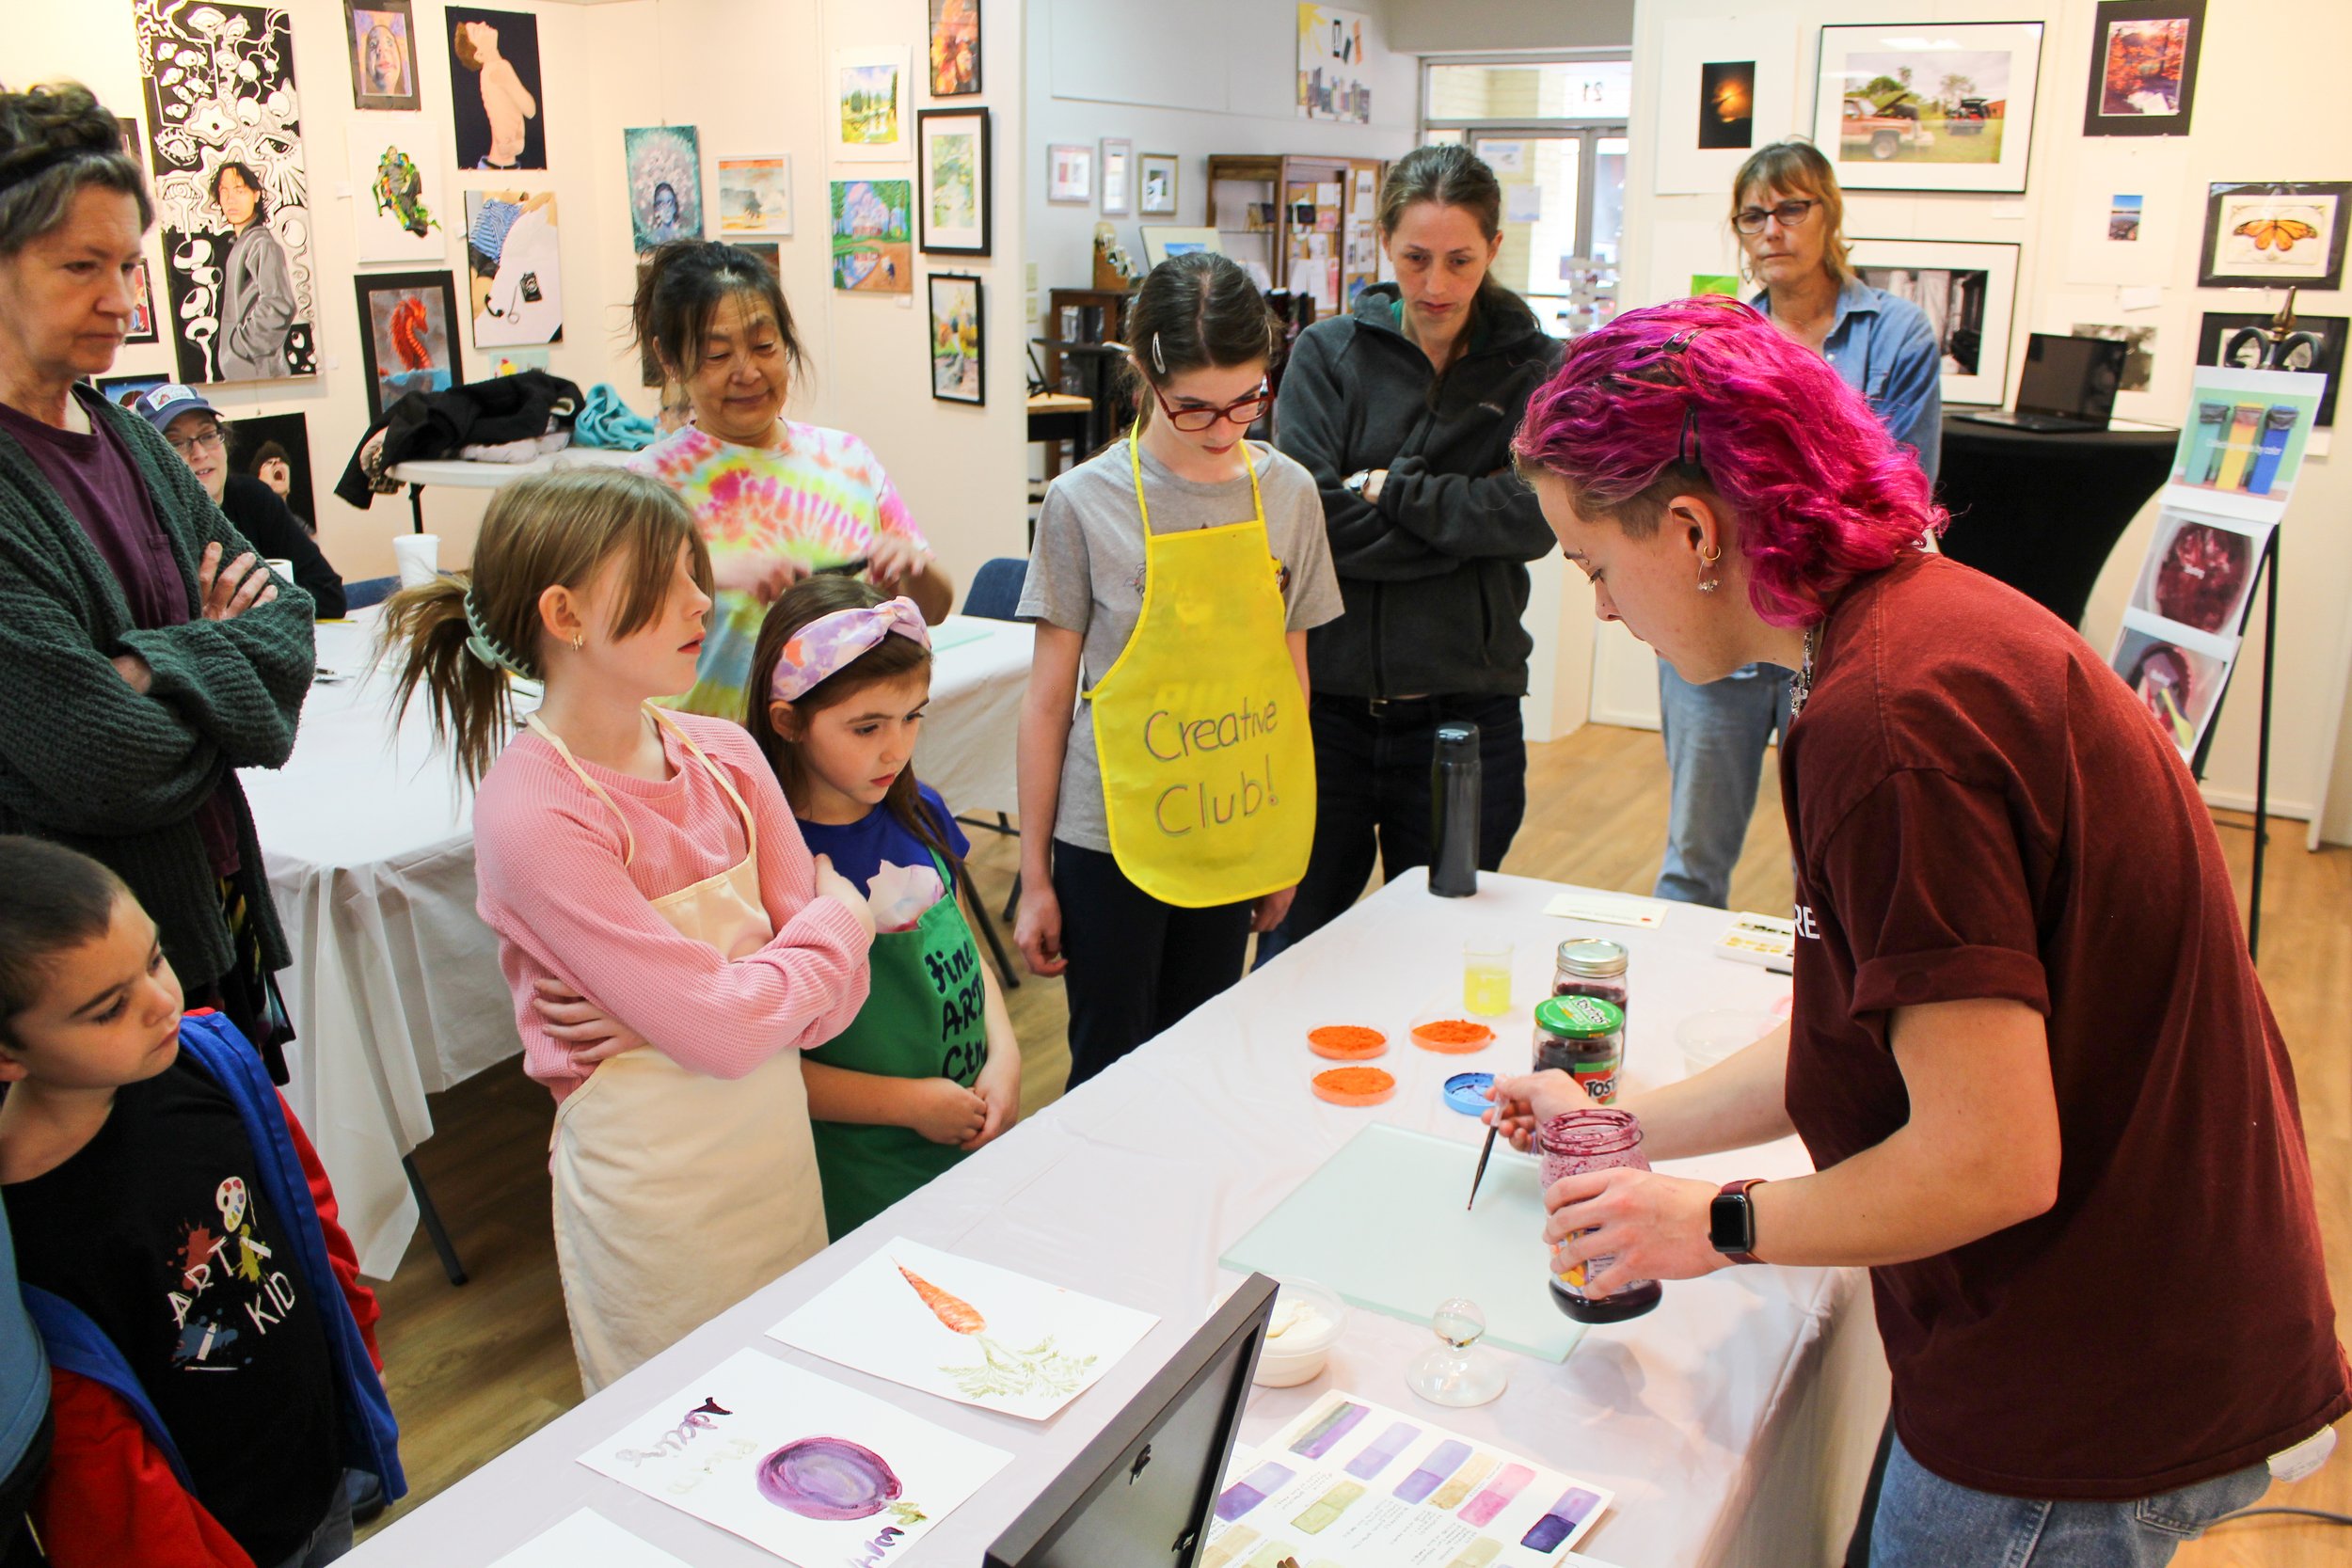 Avery Gendell demonstrates how to use the paint. Photo courtesy of Yoon Choi.